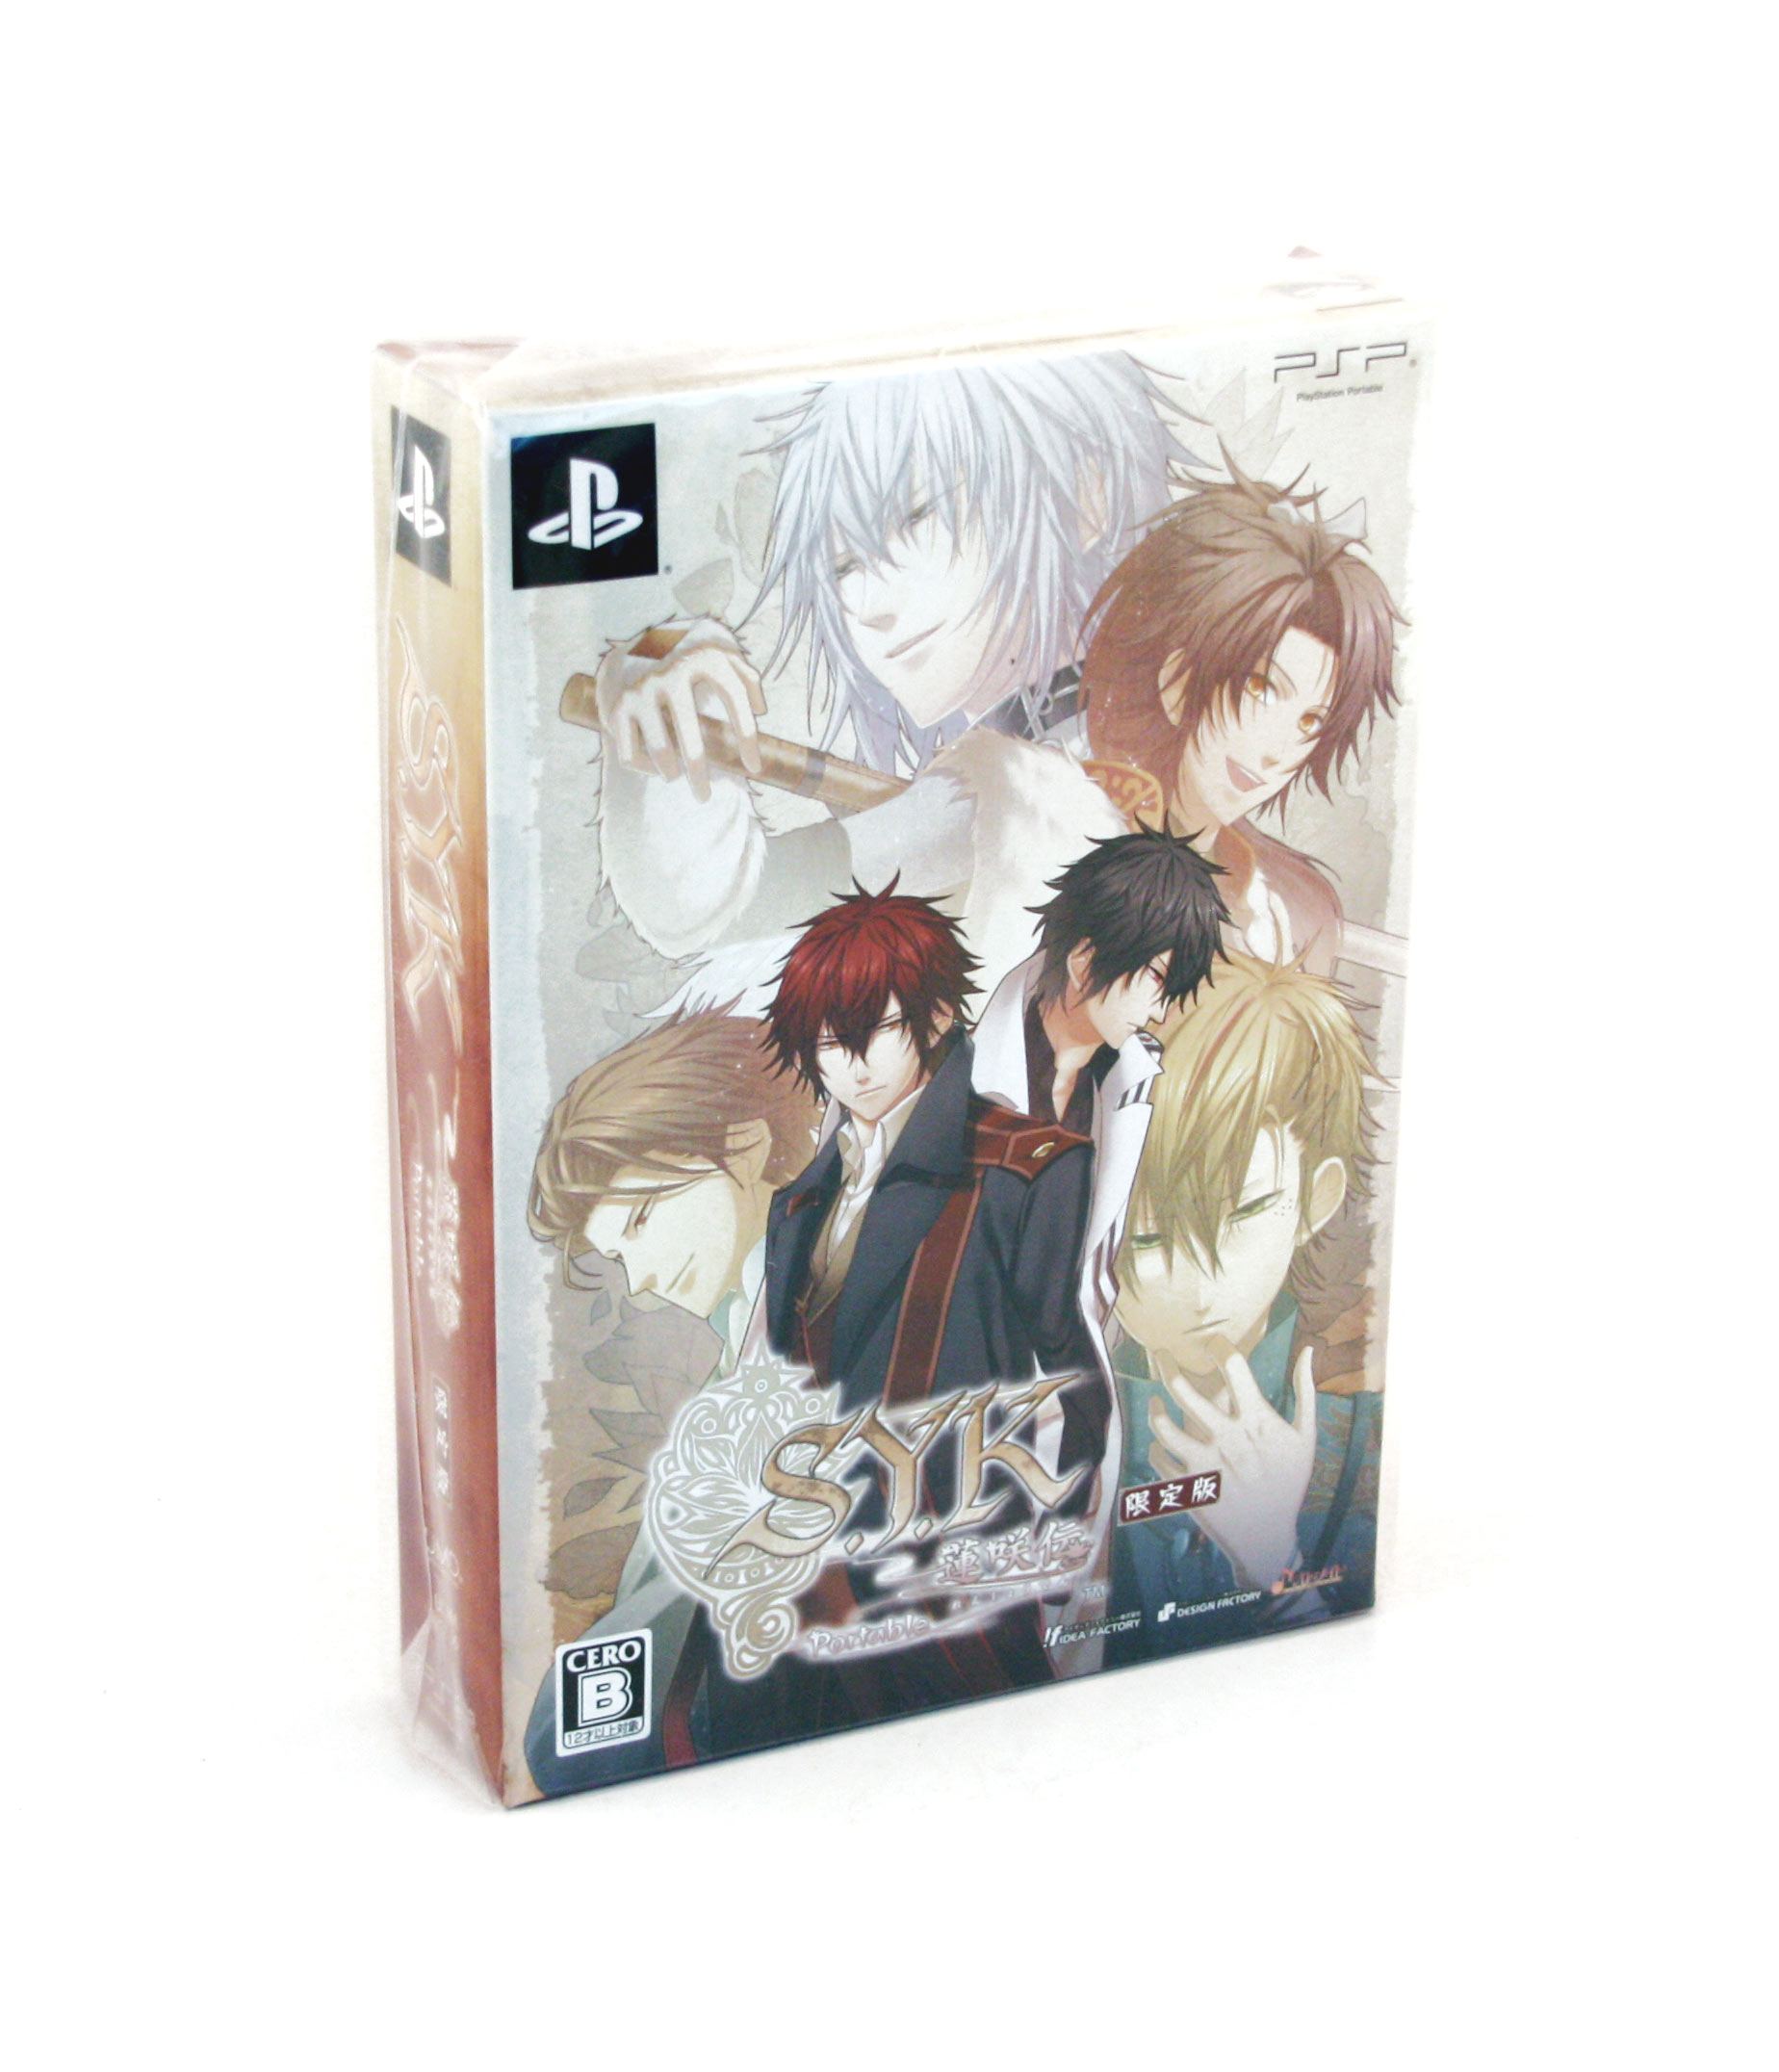 S.Y.K Renshouden Portable [Limited Edition] for Sony PSP